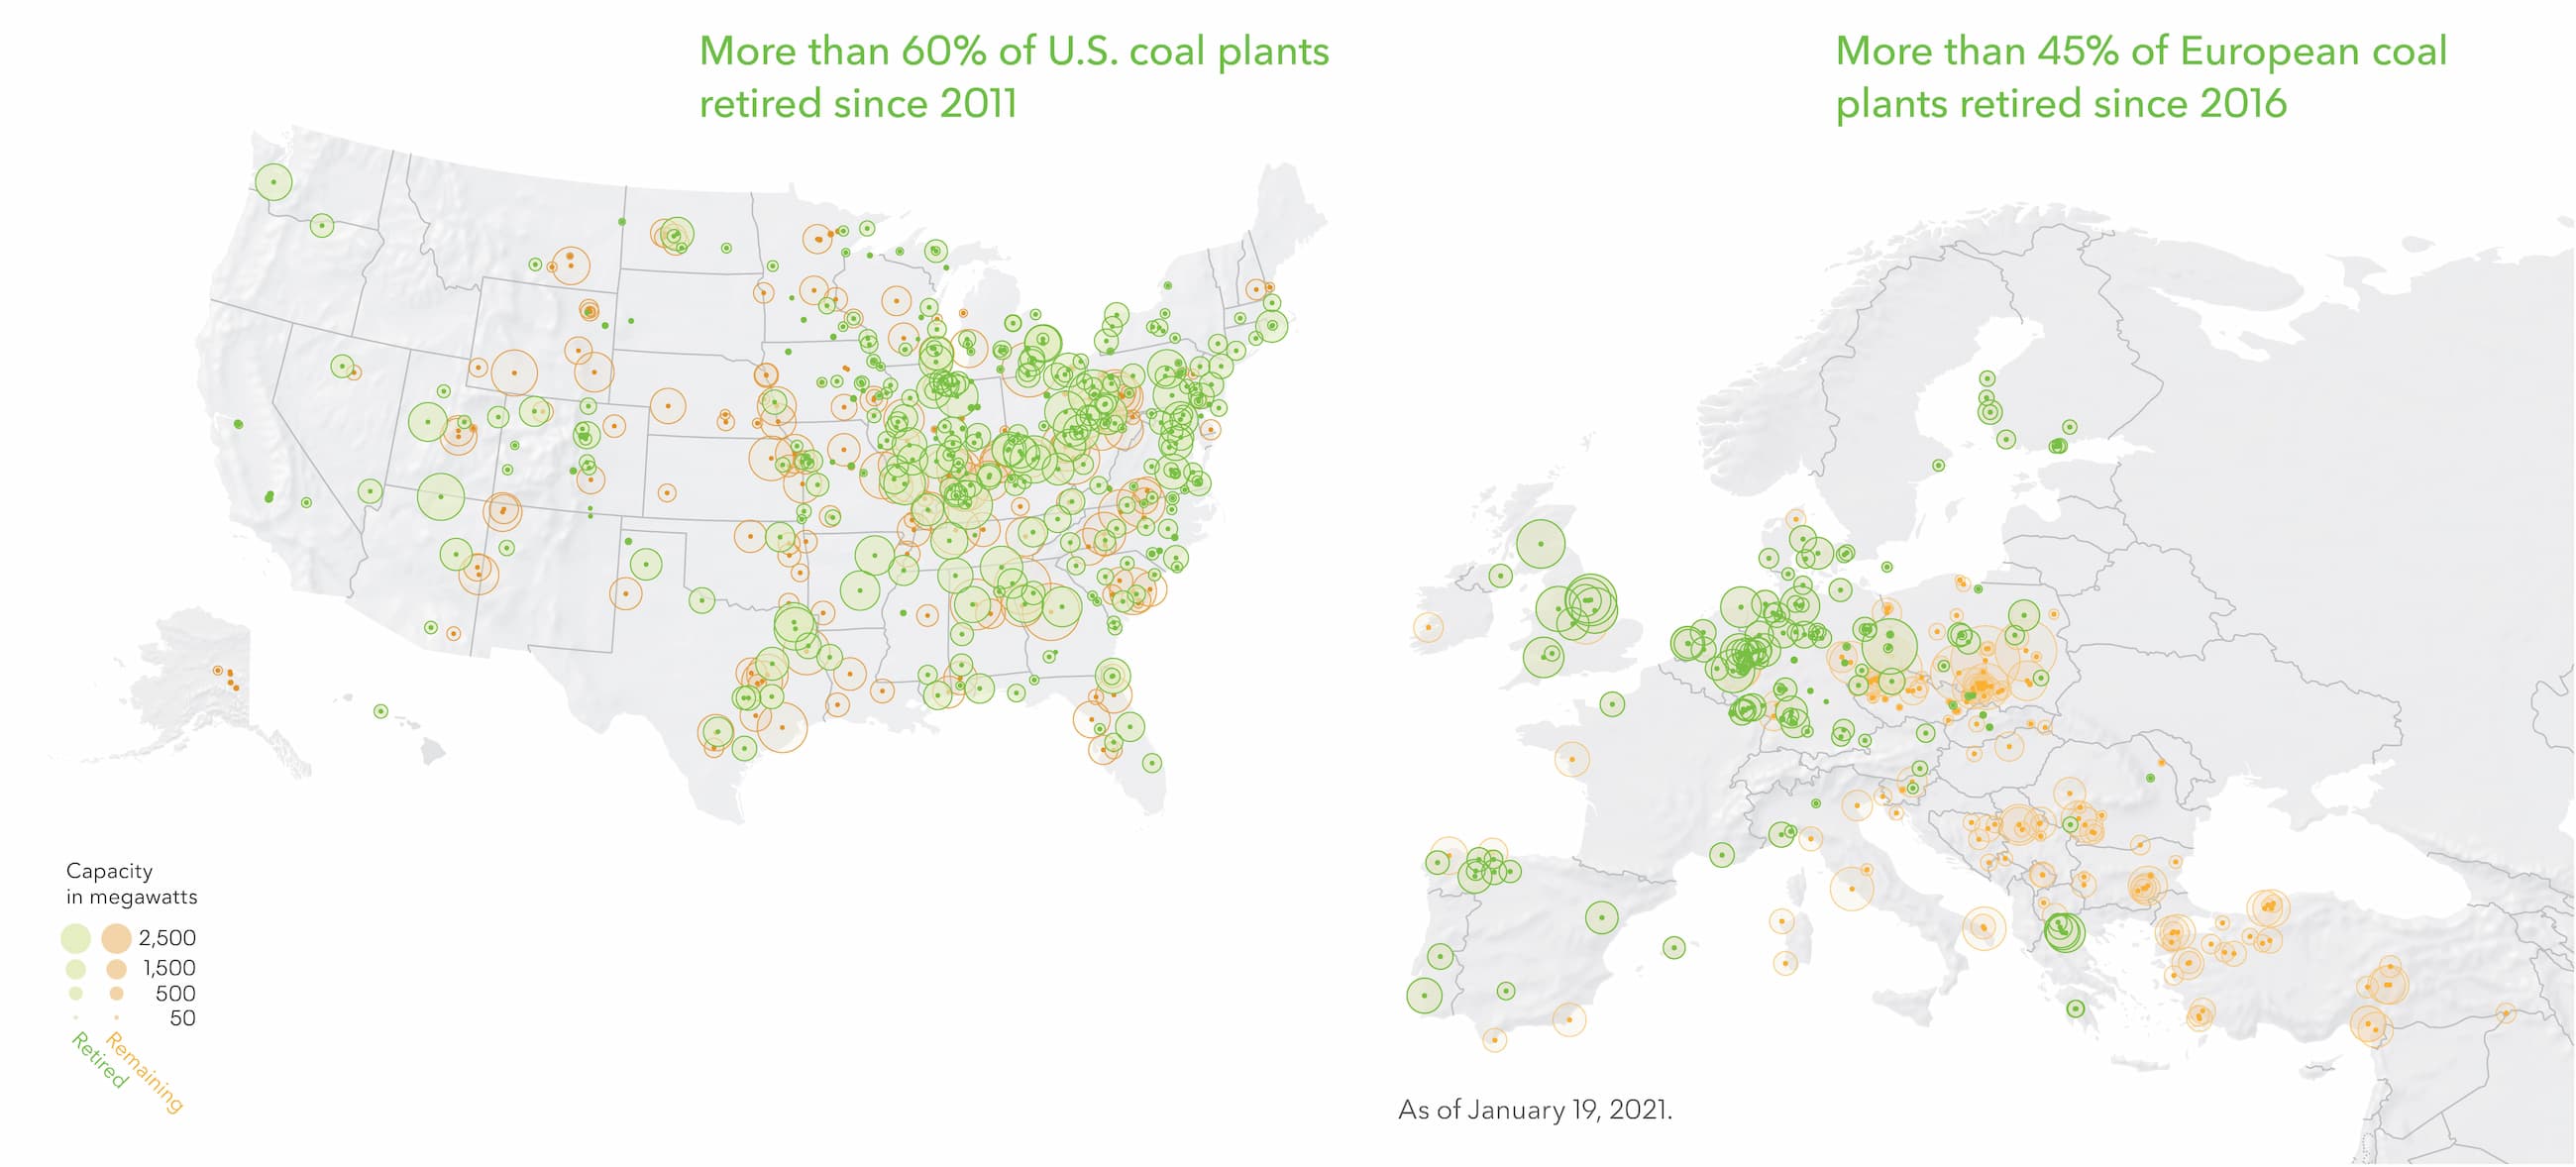 More than 60% of U.S. coal plants retired since 2011 | More than 45% of European coal plants retired since 2016